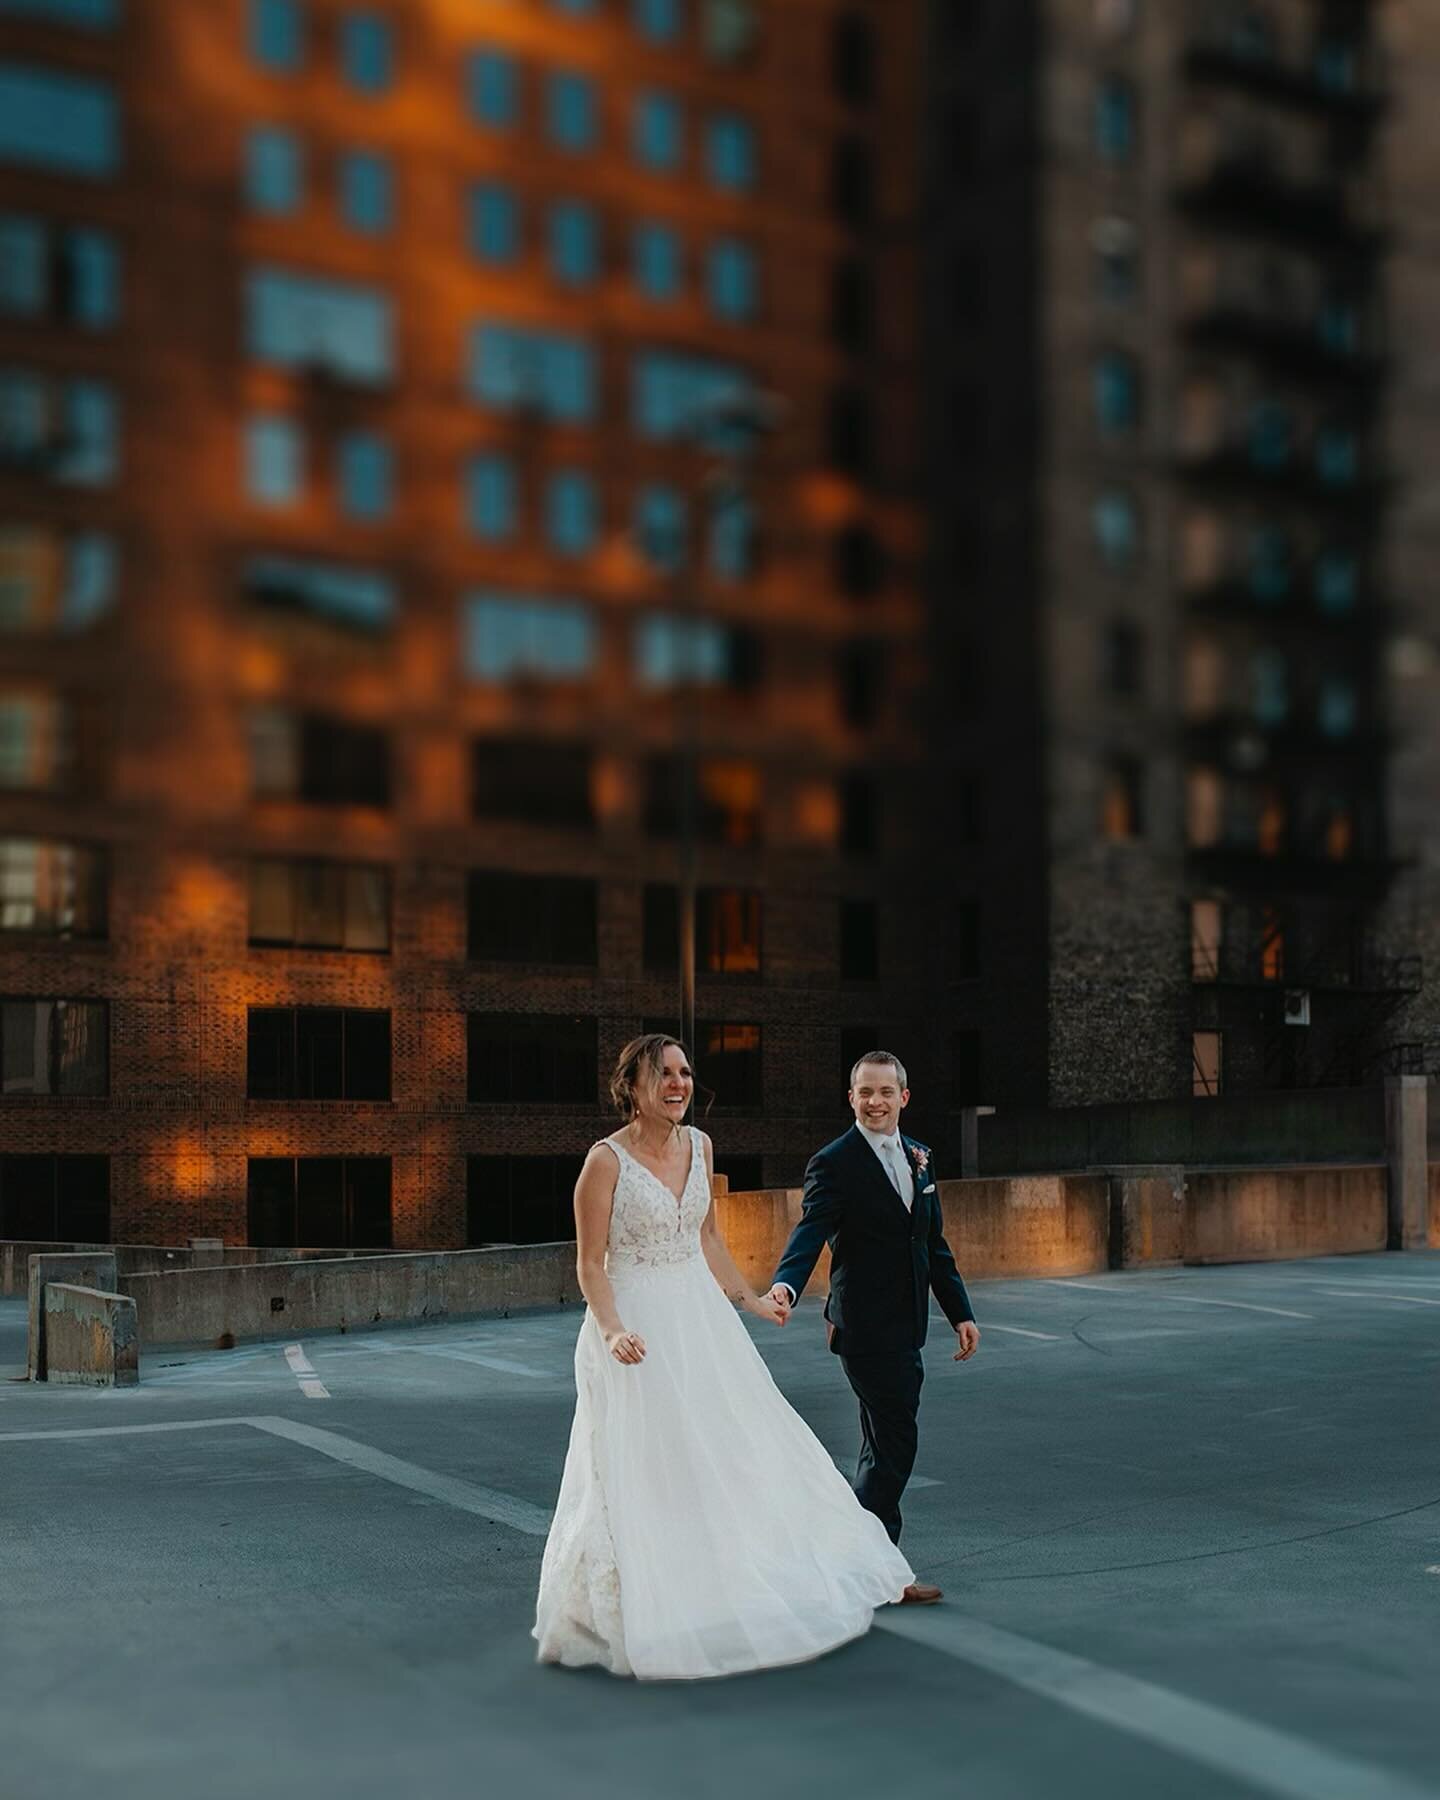 Myth: you need the perfect location for your wedding portraits, or engagement portraits. 

What you actually need:

The right mindset with your partner. Show up and be present, don&rsquo;t perform for the camera. Your smile is awesome your love is aw